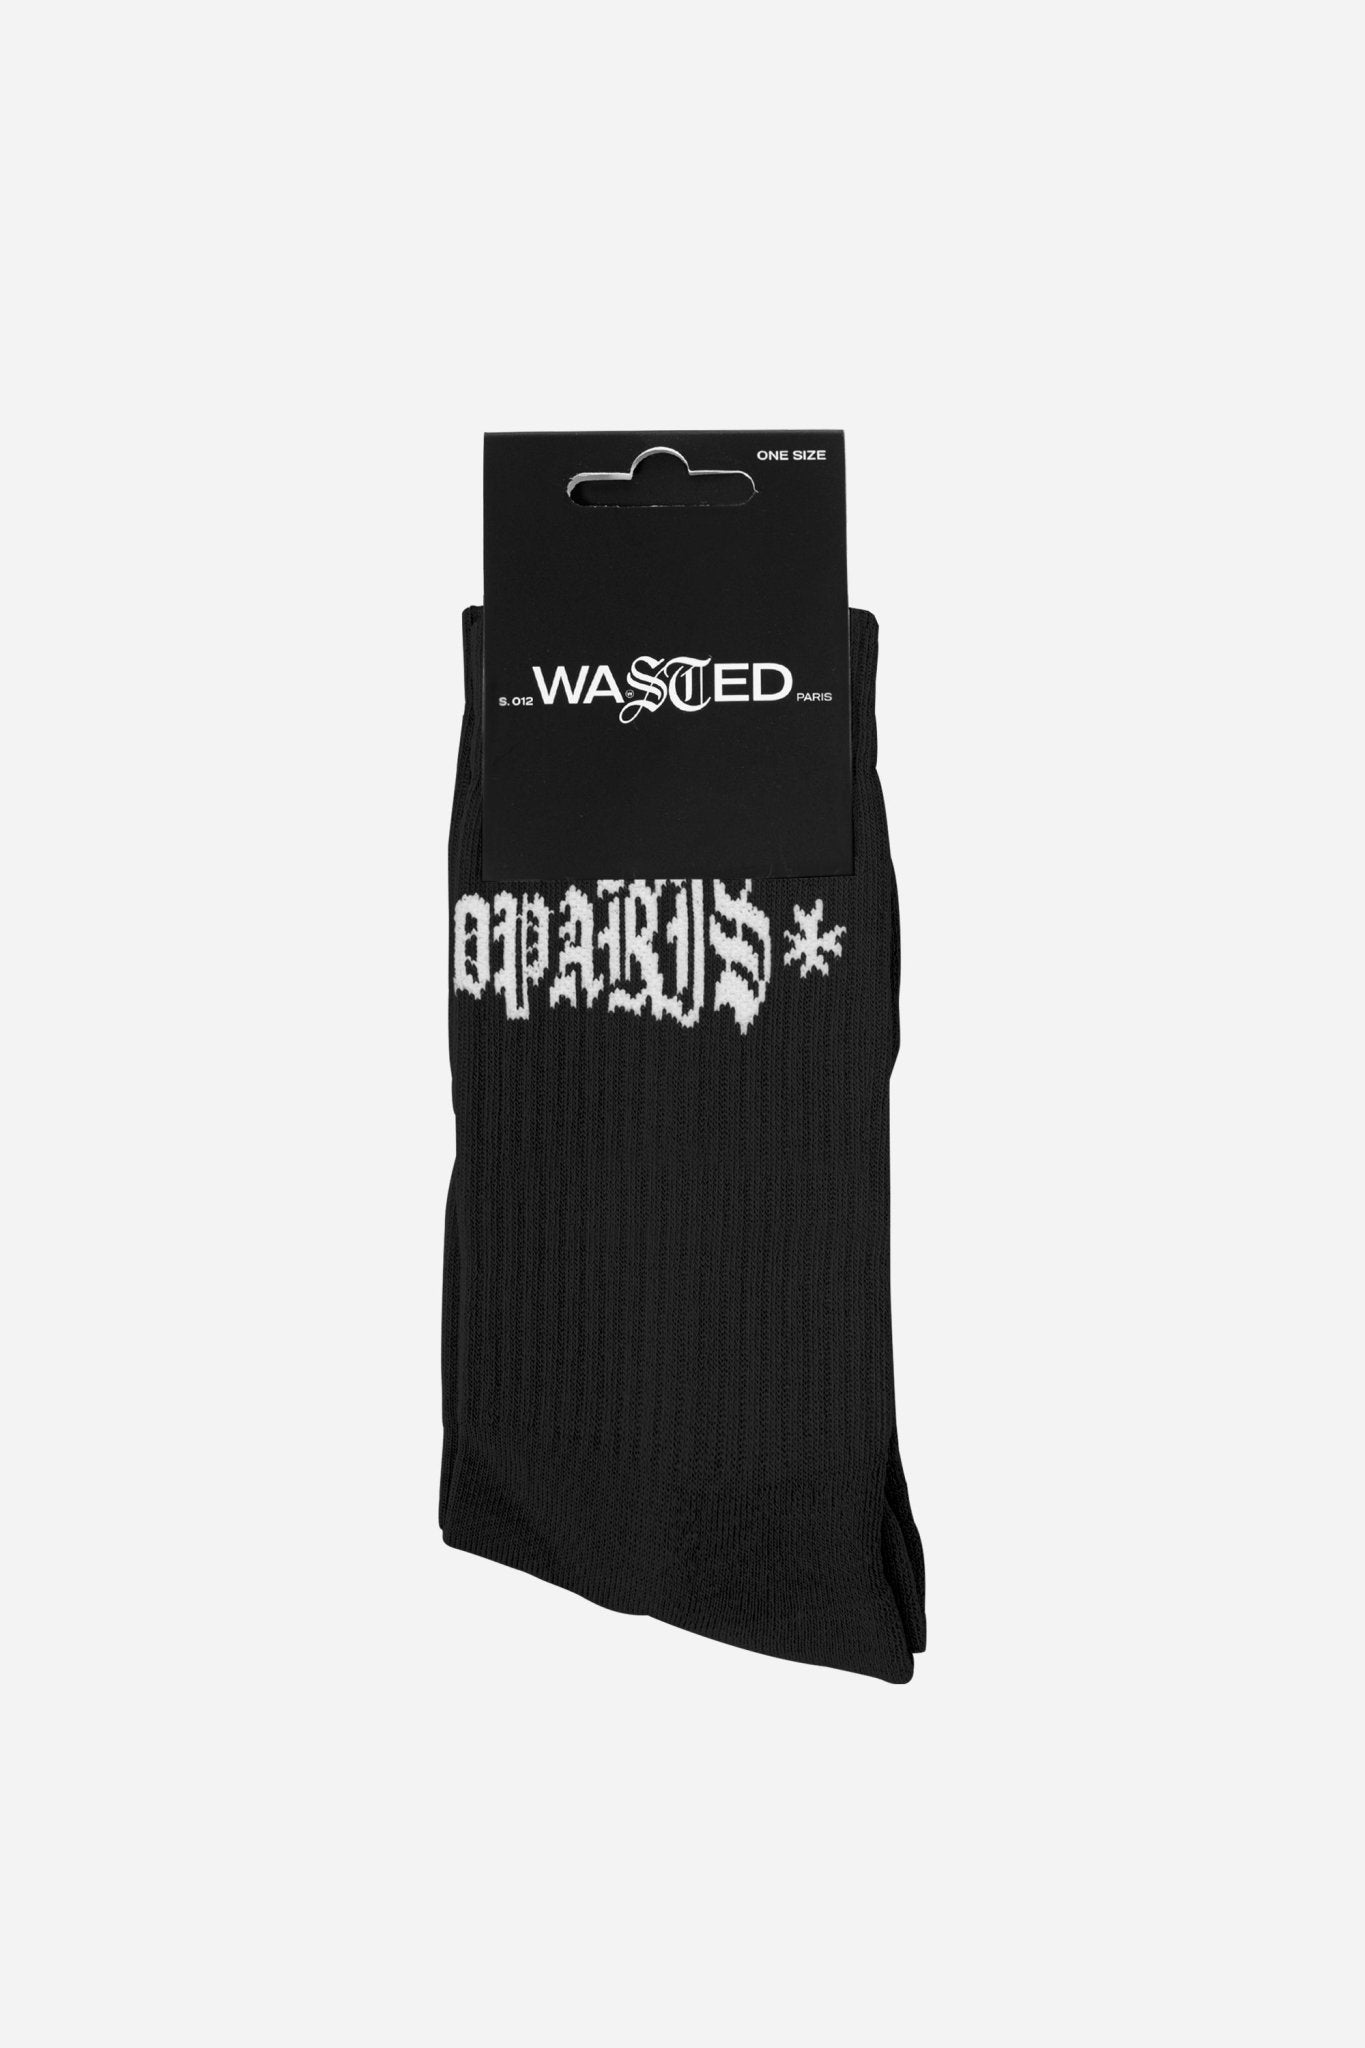 Chaussettes London Cross - WASTED PARIS